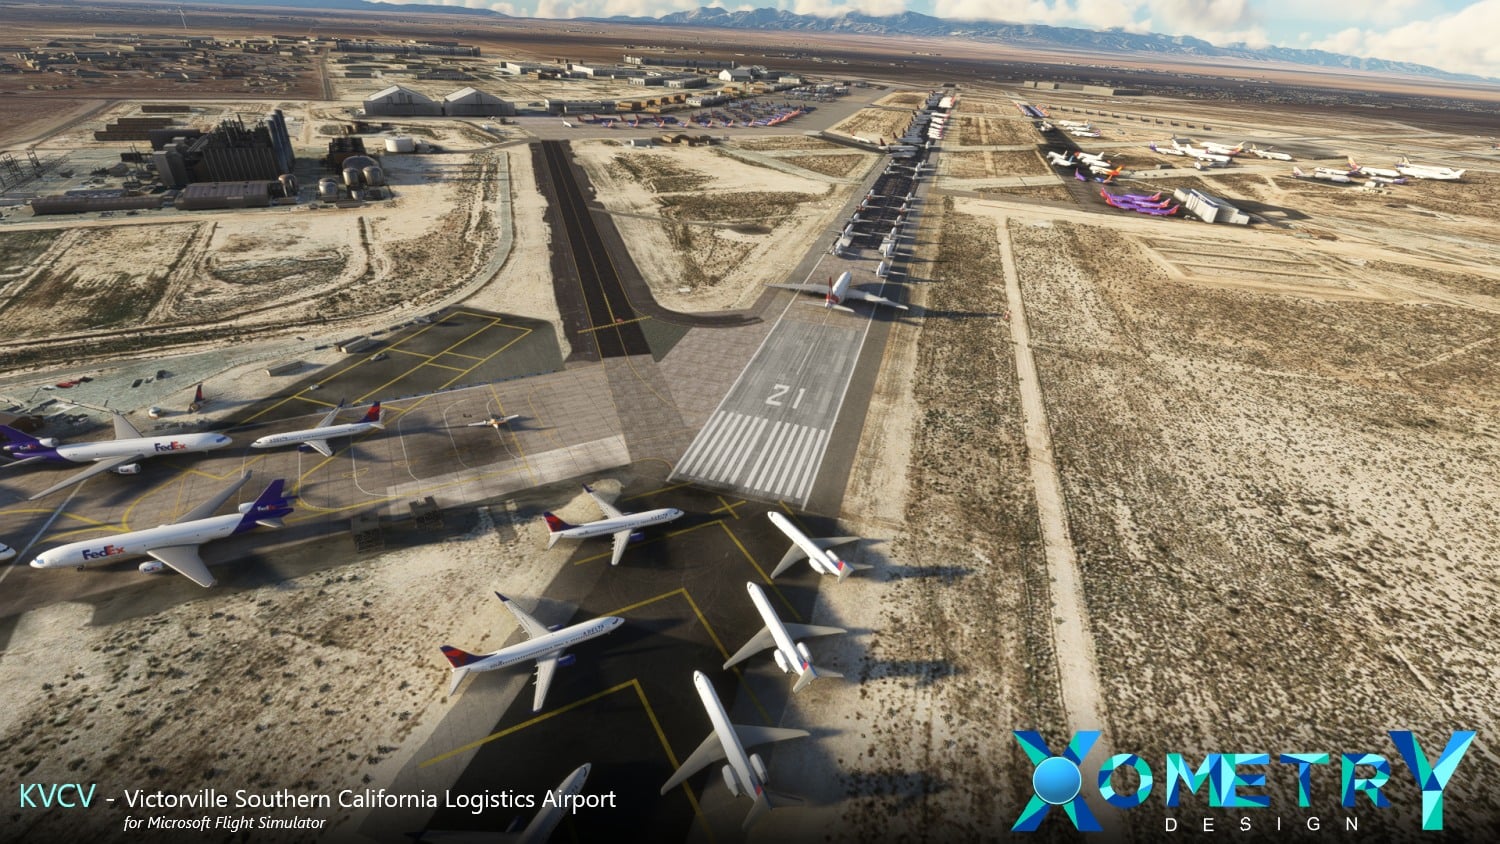 Xometry Design Announces Victorville for MSFS - Xometry